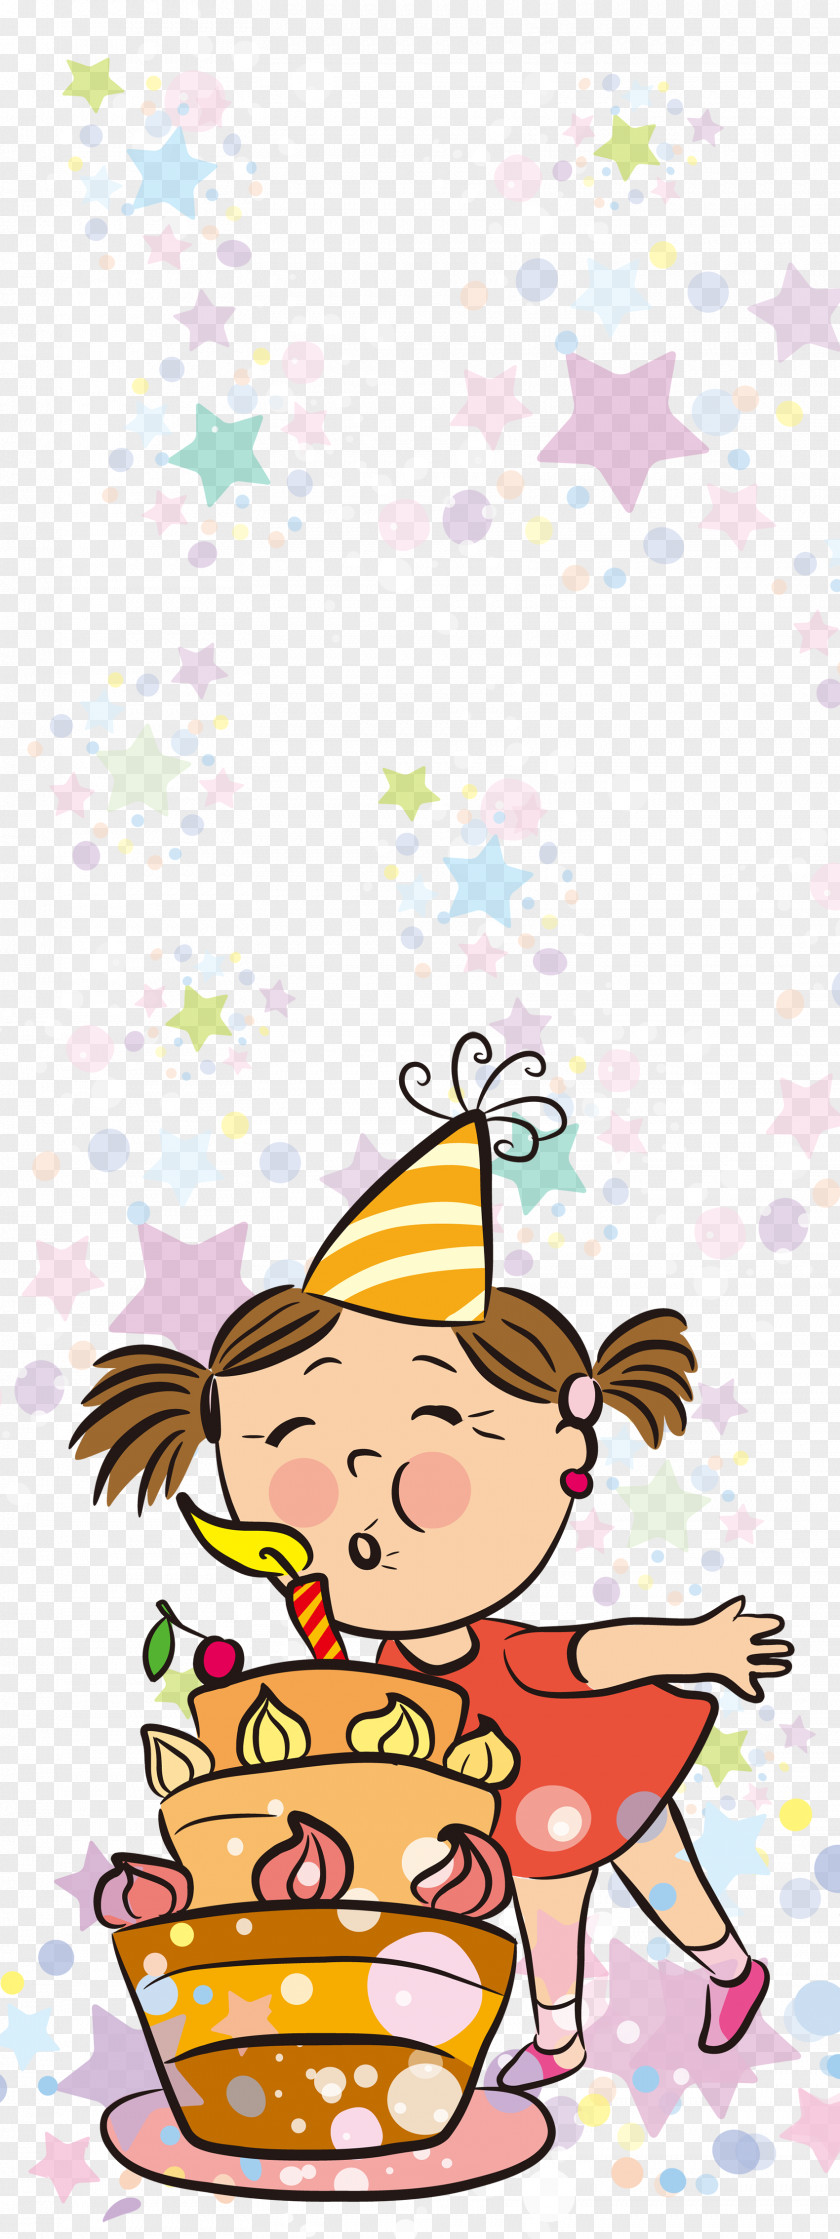 Creative Doll Birthday Wish Happiness Greeting Card PNG